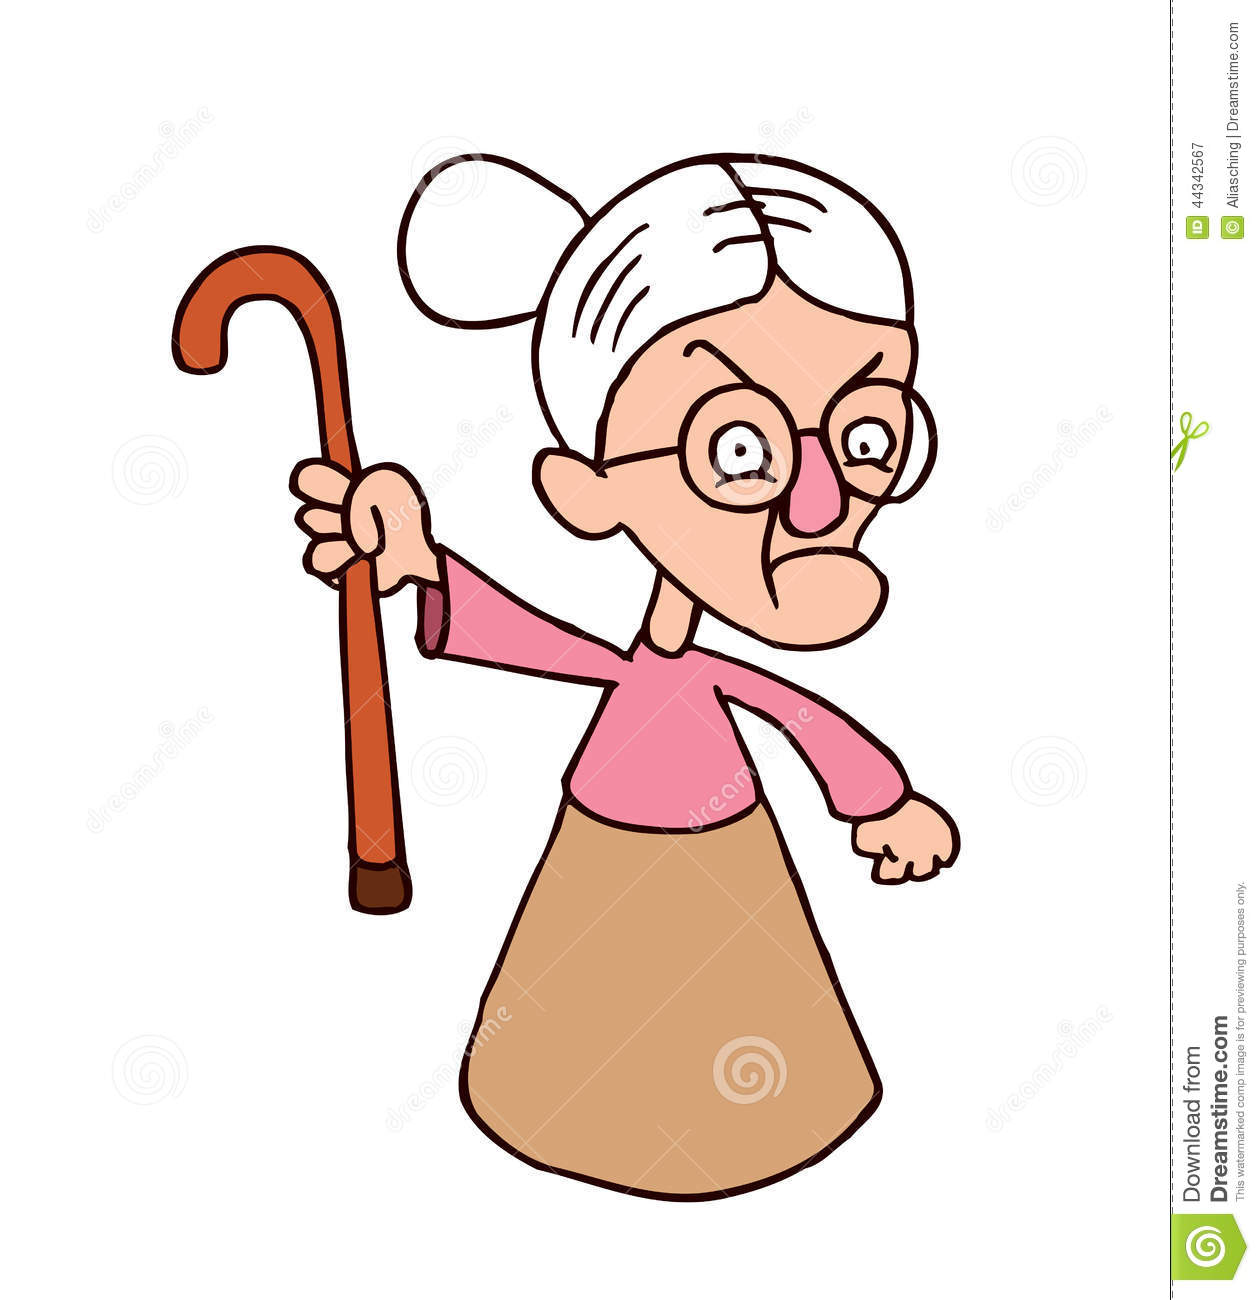 Old granny pencil and. Grandparents clipart mad